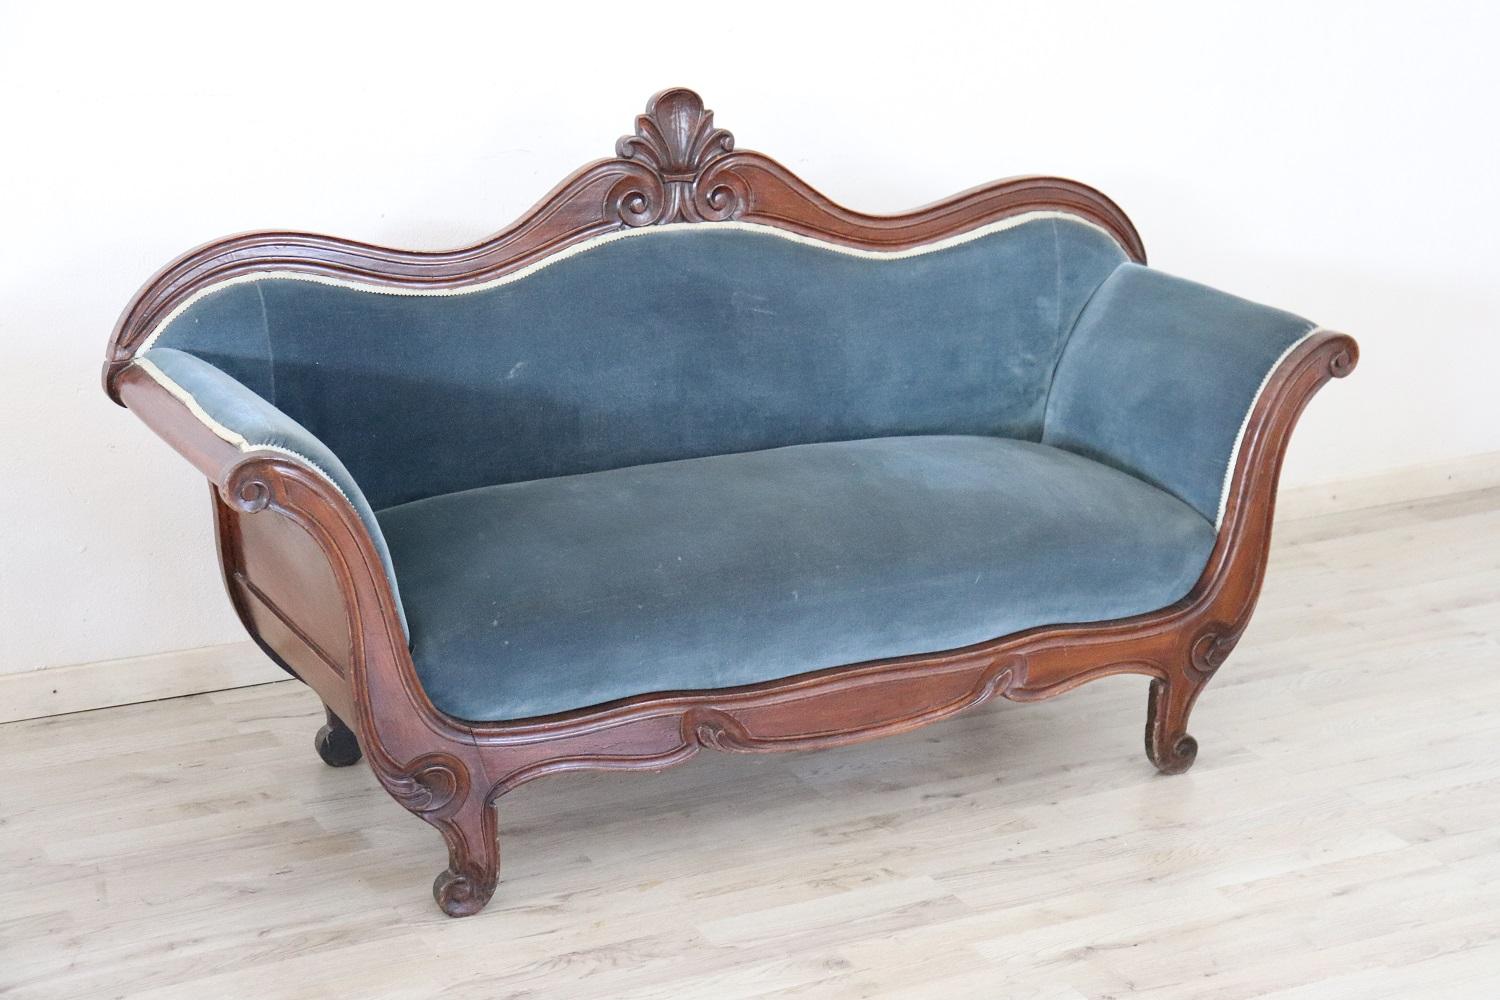 Antique settee 1845s in full Louis Philippe era. The settee is made of solid beech wood hand carved. Refined velvet in blue color. Excellent antique good conditions of the wood, some signs of wear in the velvet. It is an adorable sofa due to its